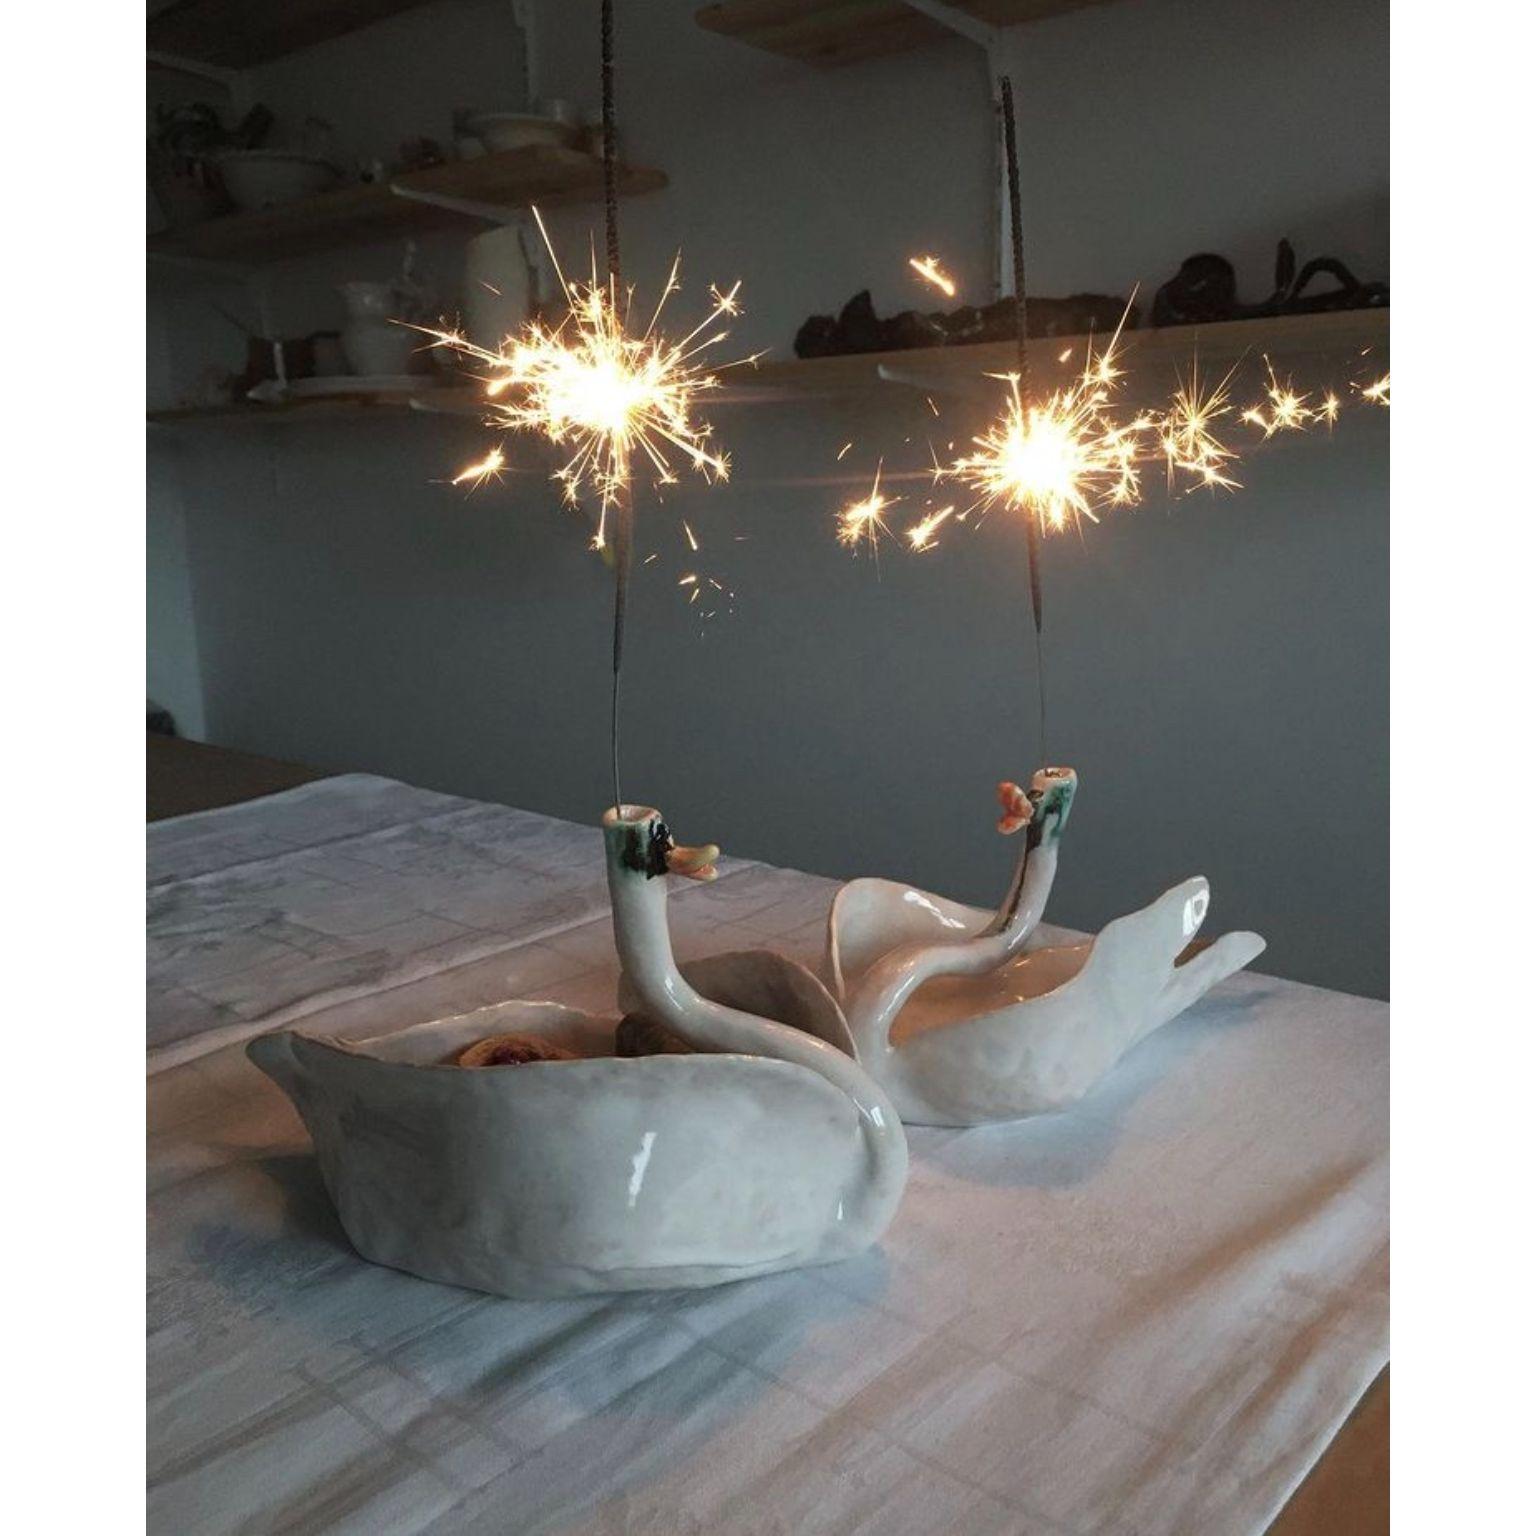 Set of 2 swan candle holder bowls by Ana Botezatu
Dimensions: D 22 x W 13 x H 13 cmn // D 21 x W 10 x H 11 cm.
Materials: glazed earthenware.

Ana Botezatu (b. 1982, Bra?ov (former Kronstadt), Romania) lives and works in Berlin. She works with